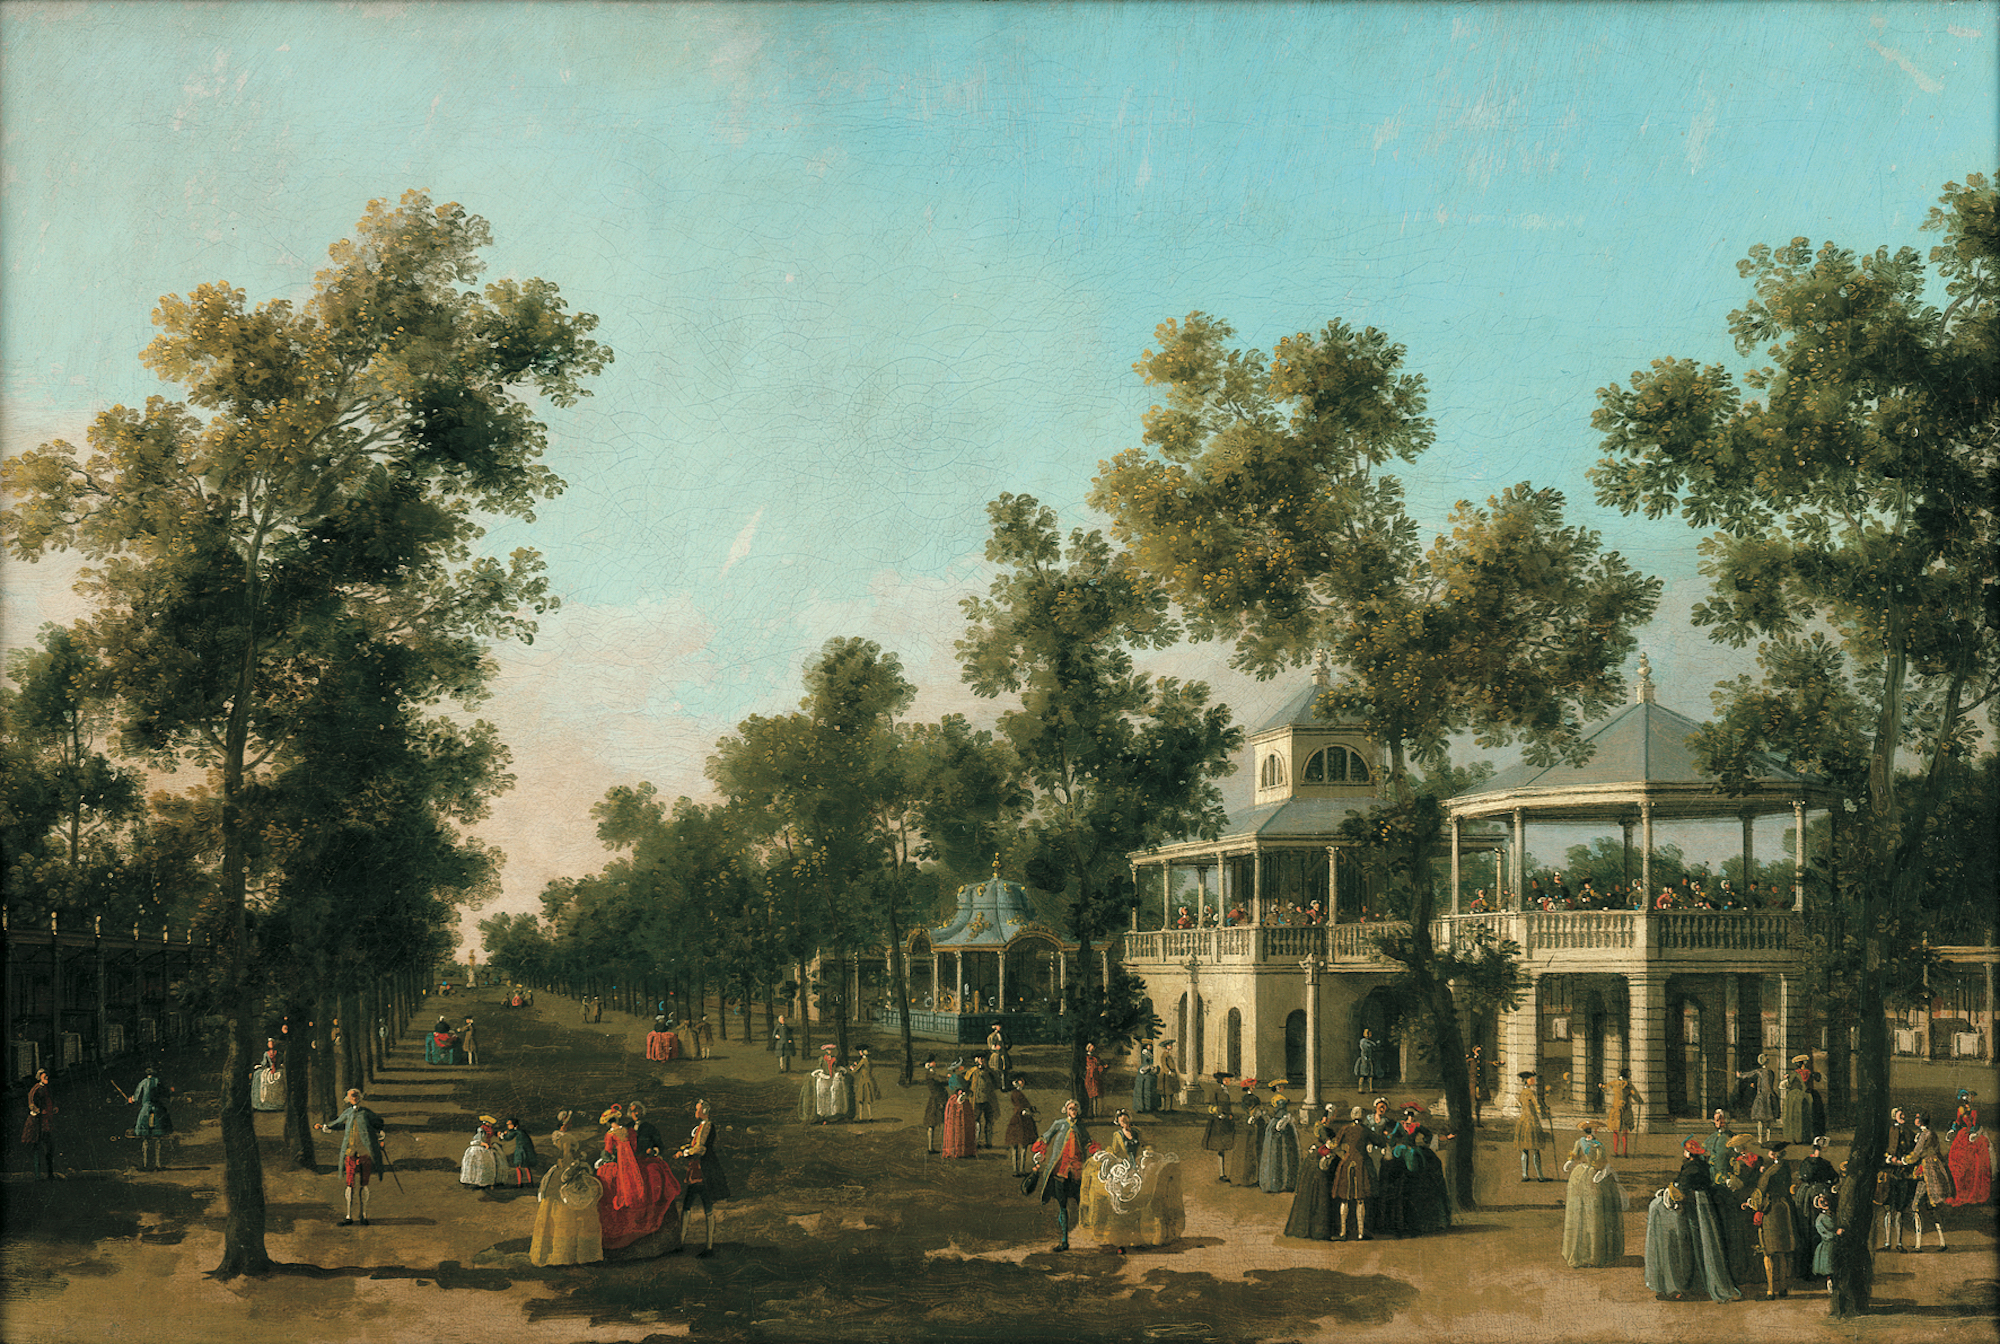 Canaletto, The Grand Walk Vauxhall Gardens, 1751